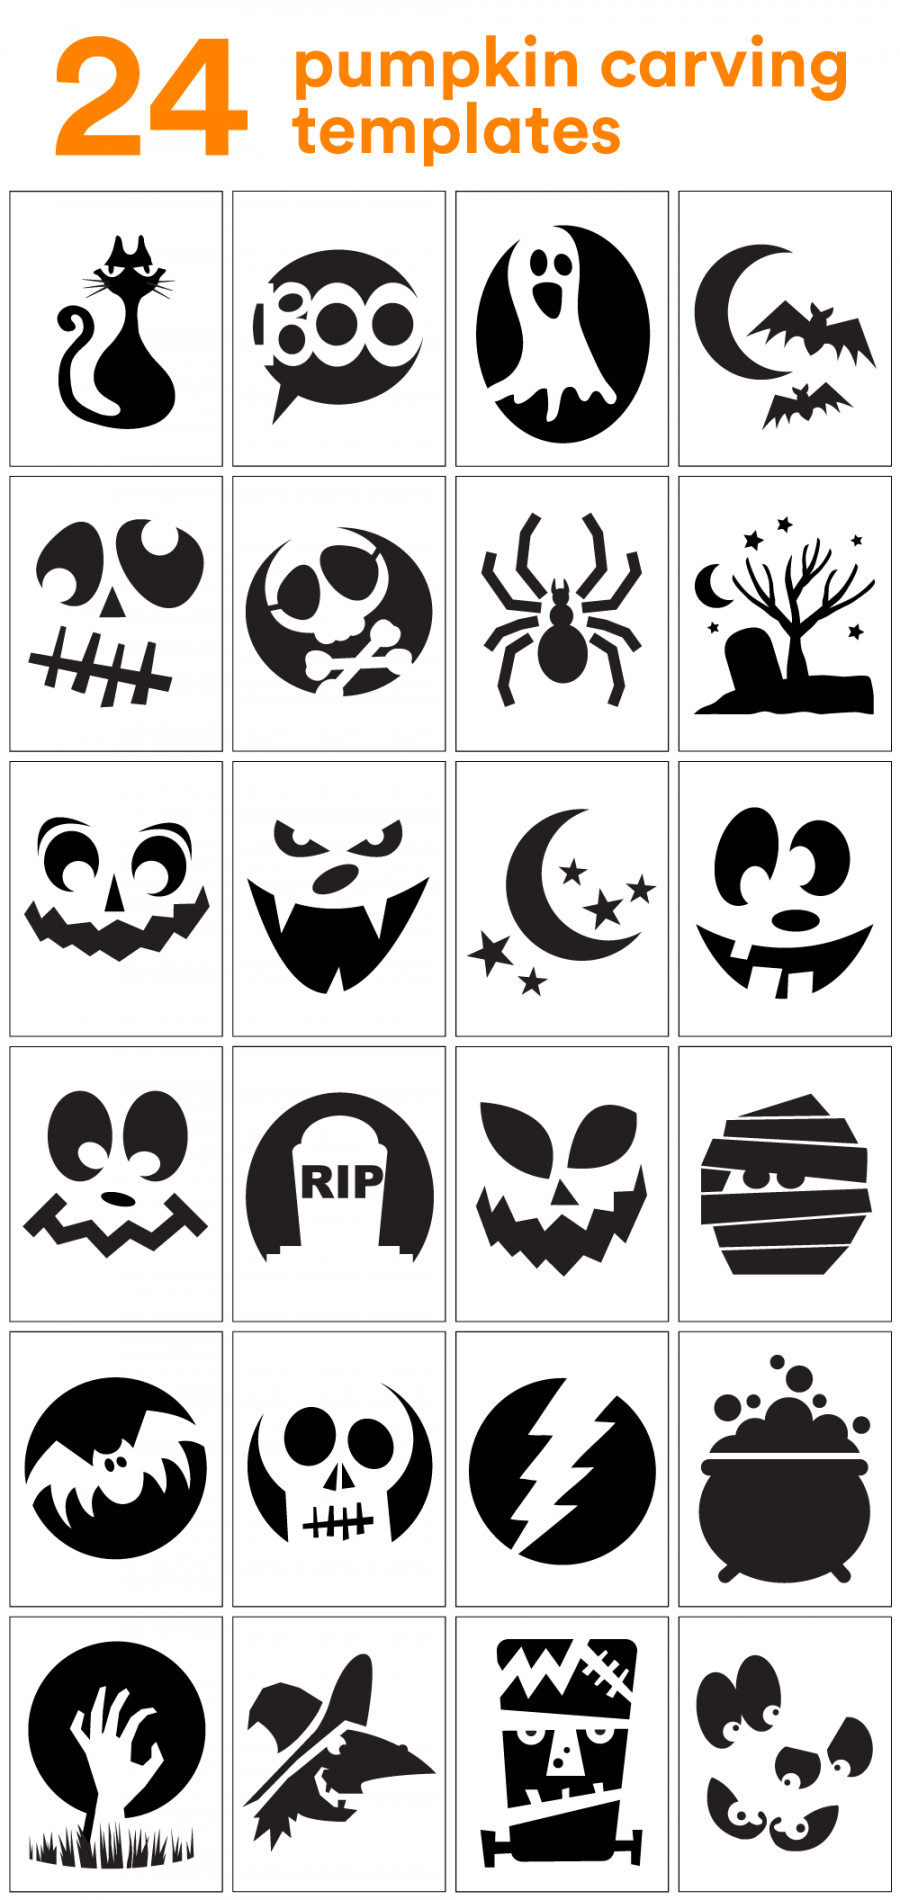 Pumpkin Carving Stencils Free Printable - Printable - How to Carve the Coolest Pumpkin on the Block (Carving Stencils